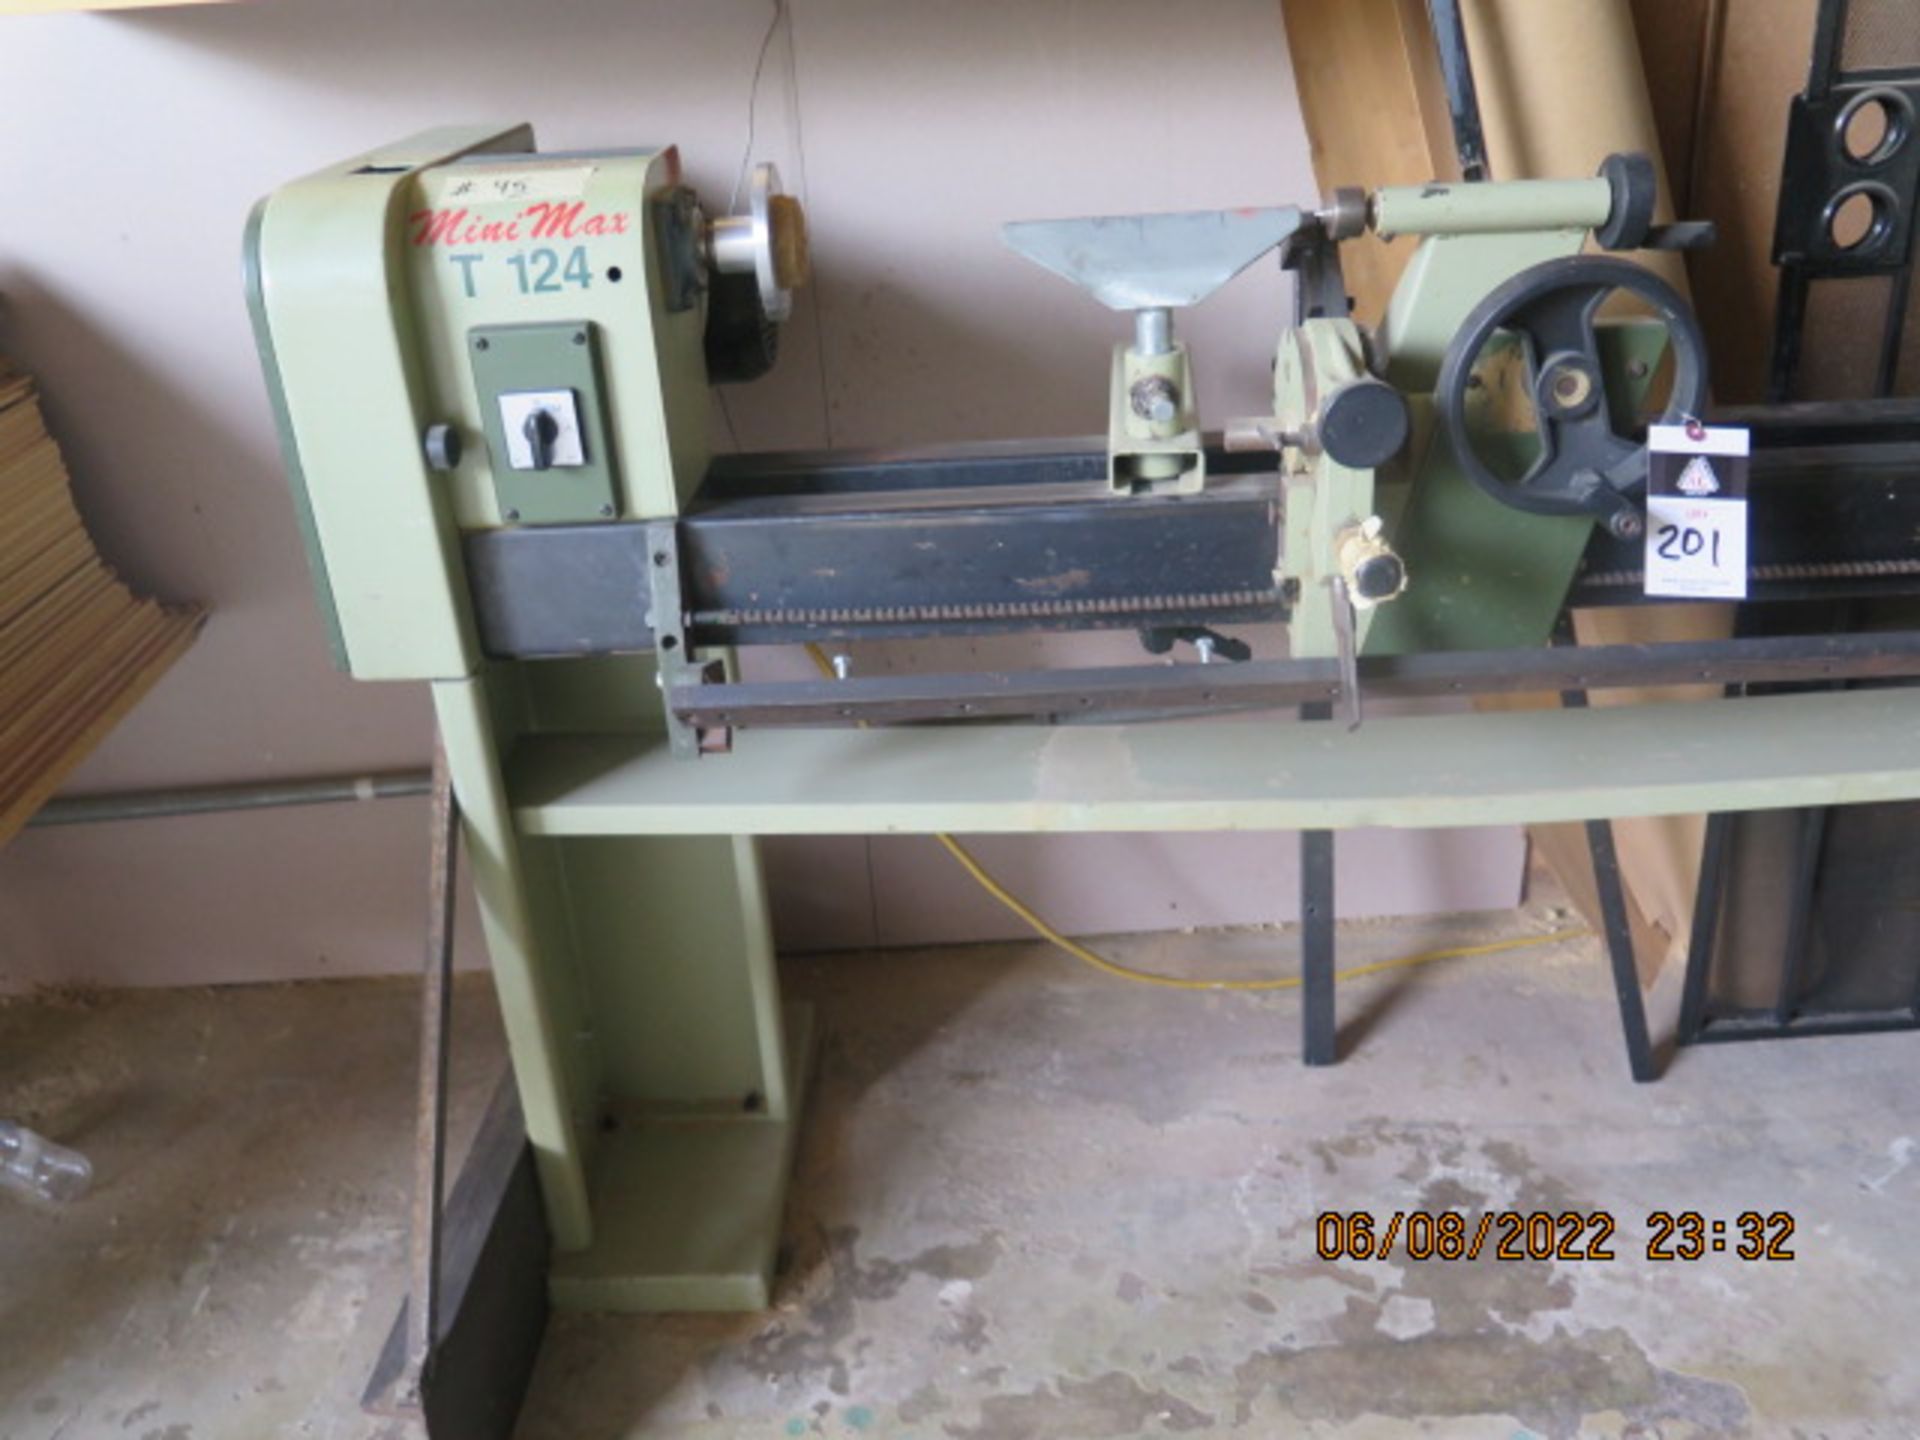 Samco MiniMax T124 16” x 96” Wood Lathe s/n KK/024947 w/ Tailstock, Tool Rest, SOLD AS IS - Image 2 of 7